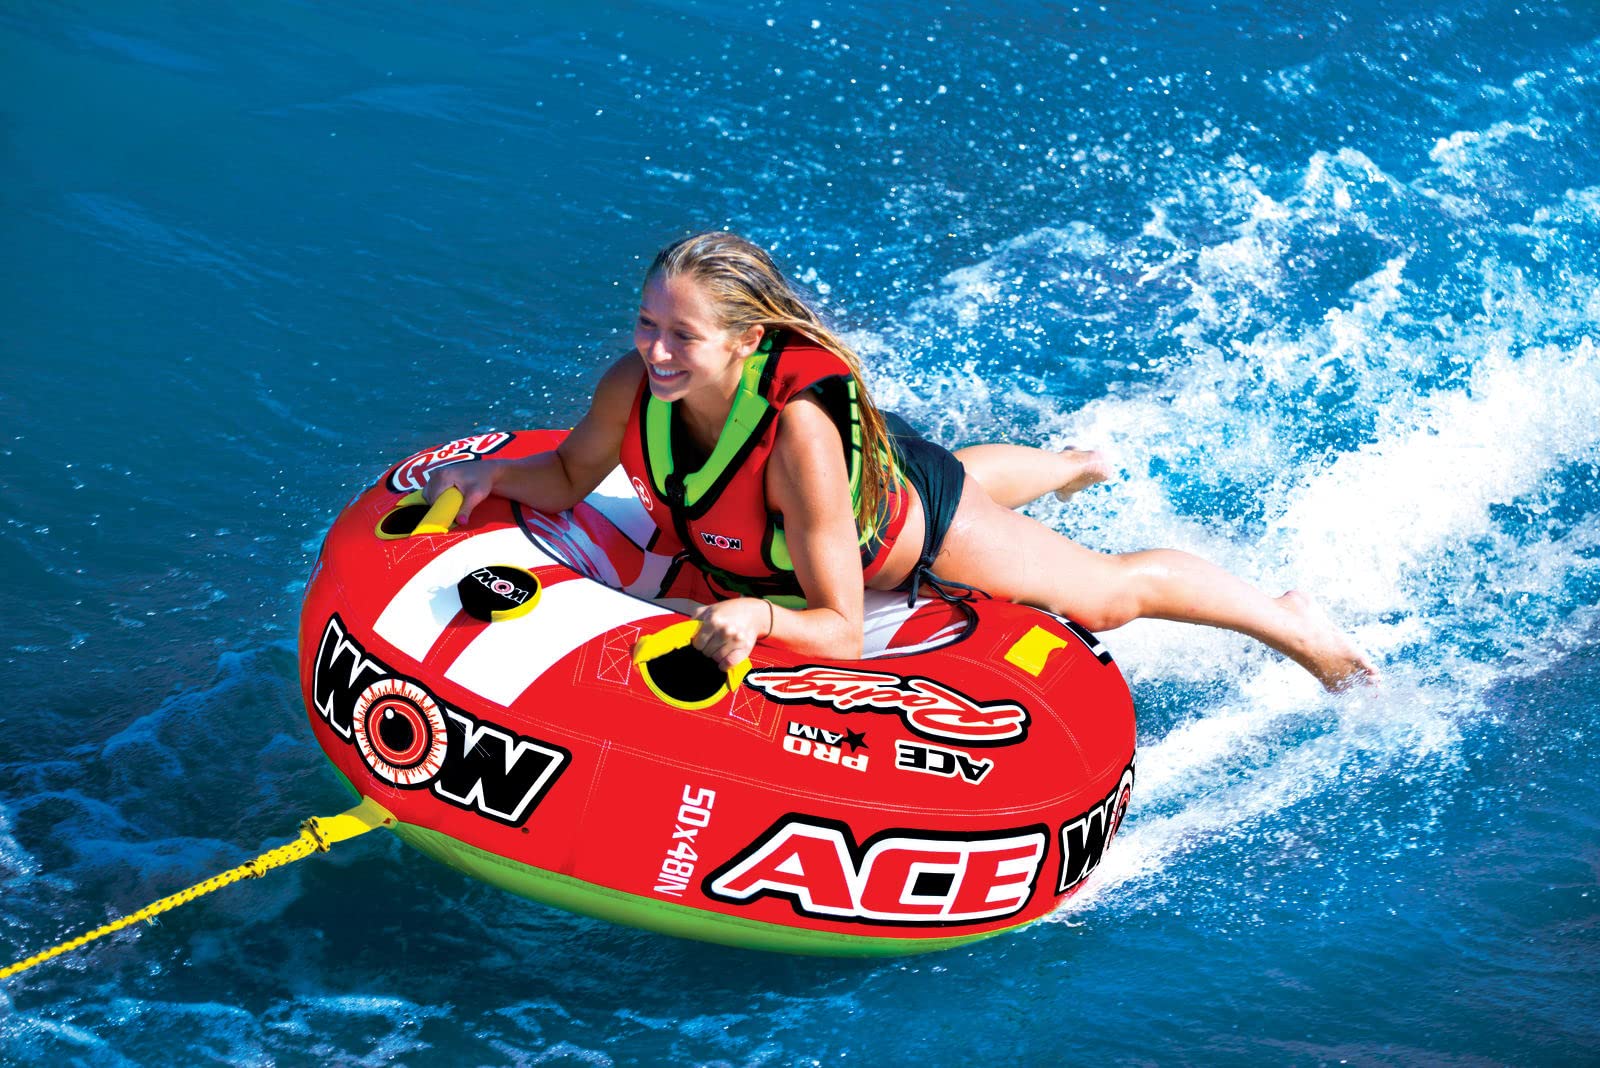 Wow Sports World of Watersports Ace Racing Boat Tube 1 Person Inflatable Towable Tube for Boating, 15-1120